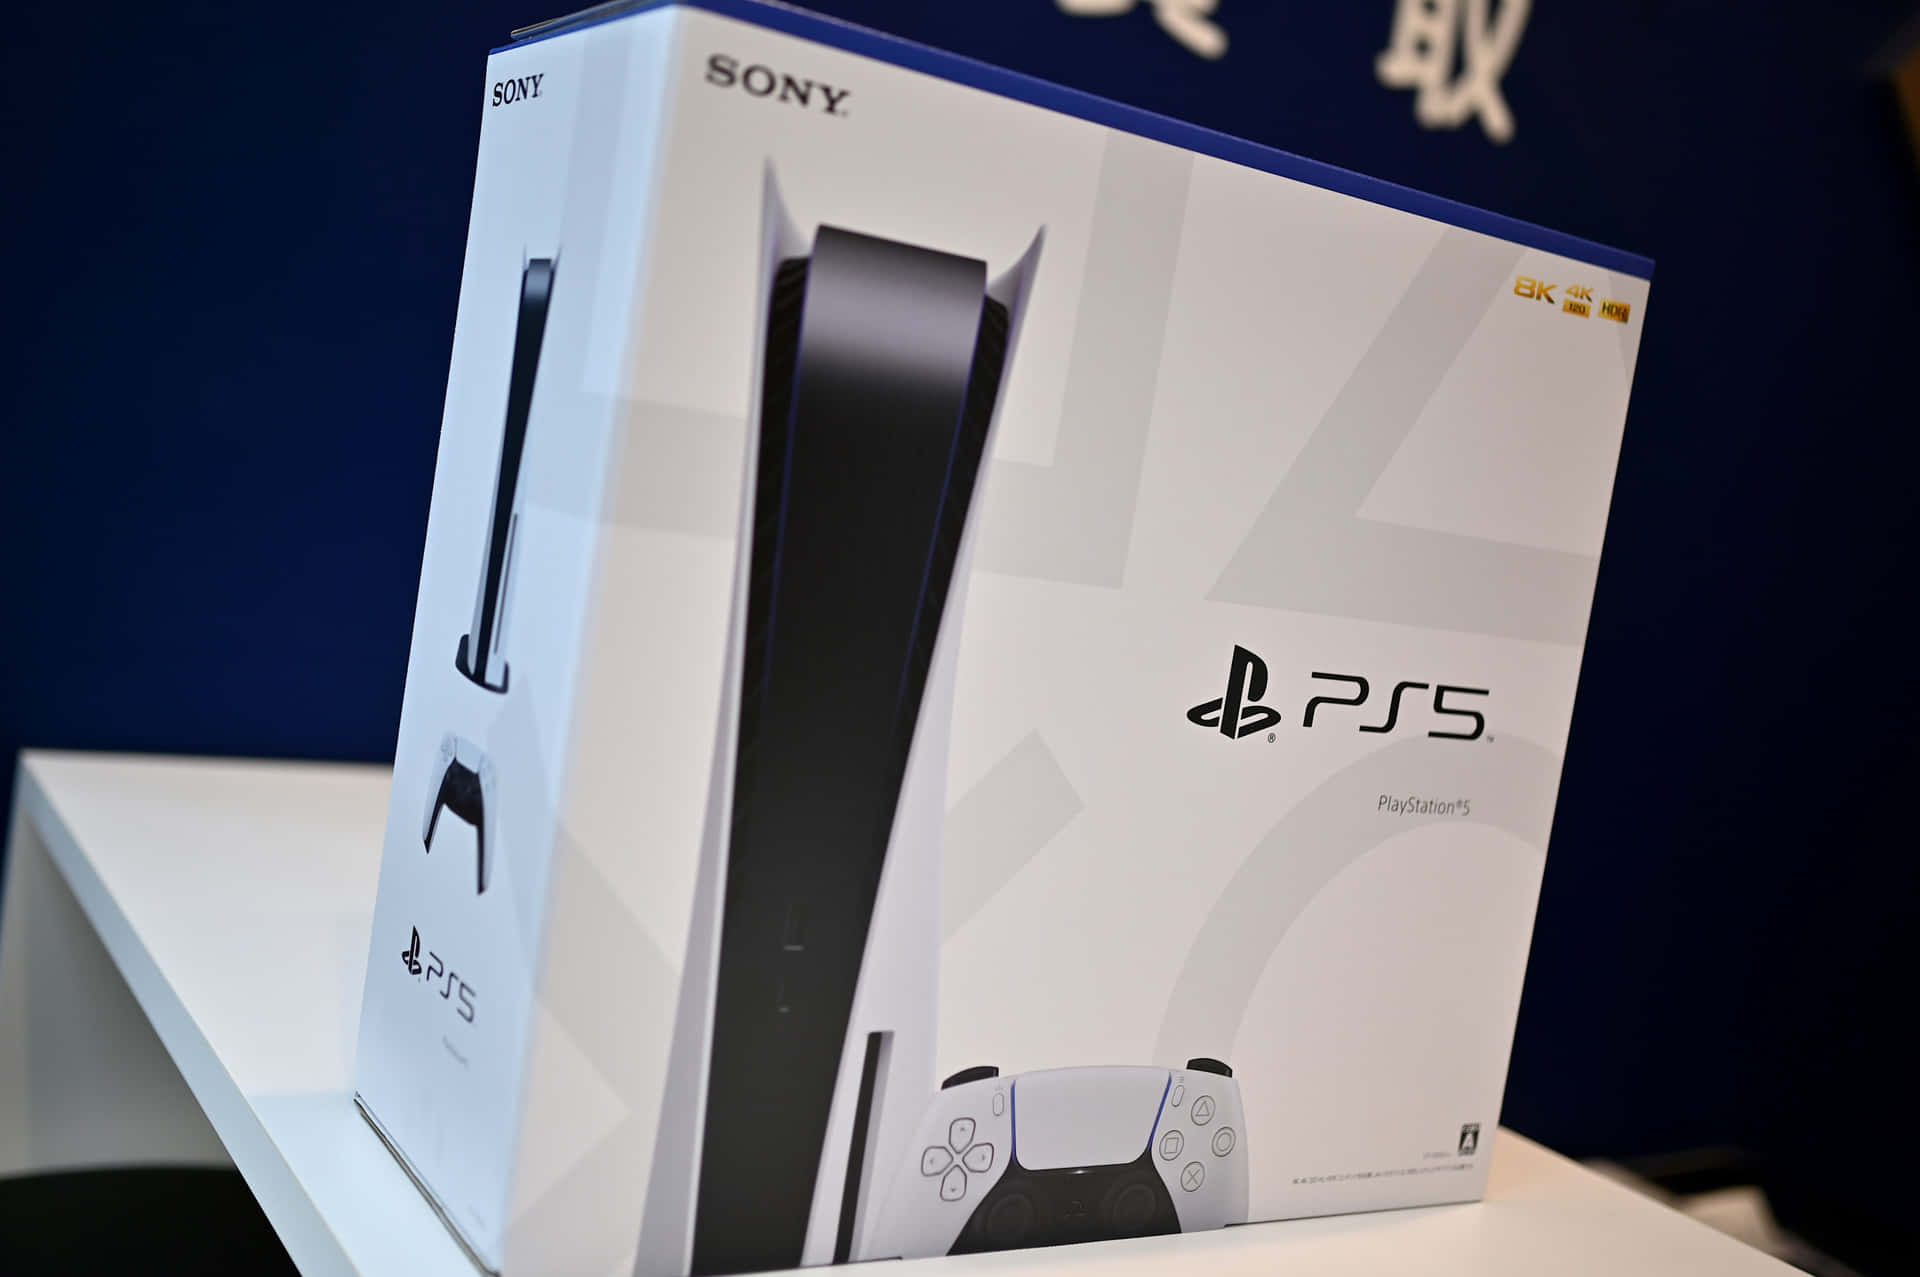 Enjoy a new level of entertainment gaming experience with Playstation